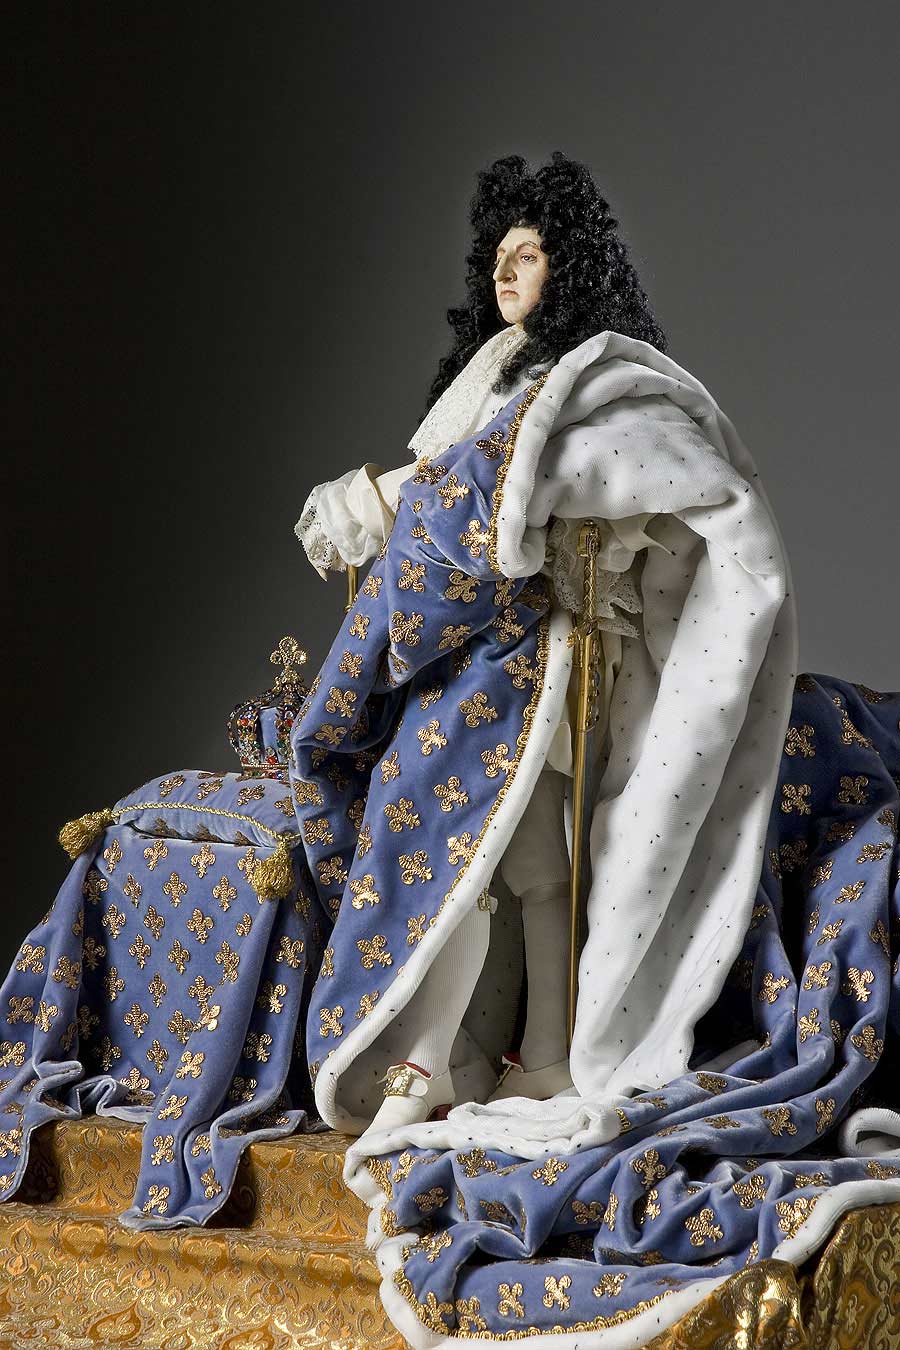 Louis XIV – robes of state | Life at court was a series of spectacles and ceremonies with Louis ...